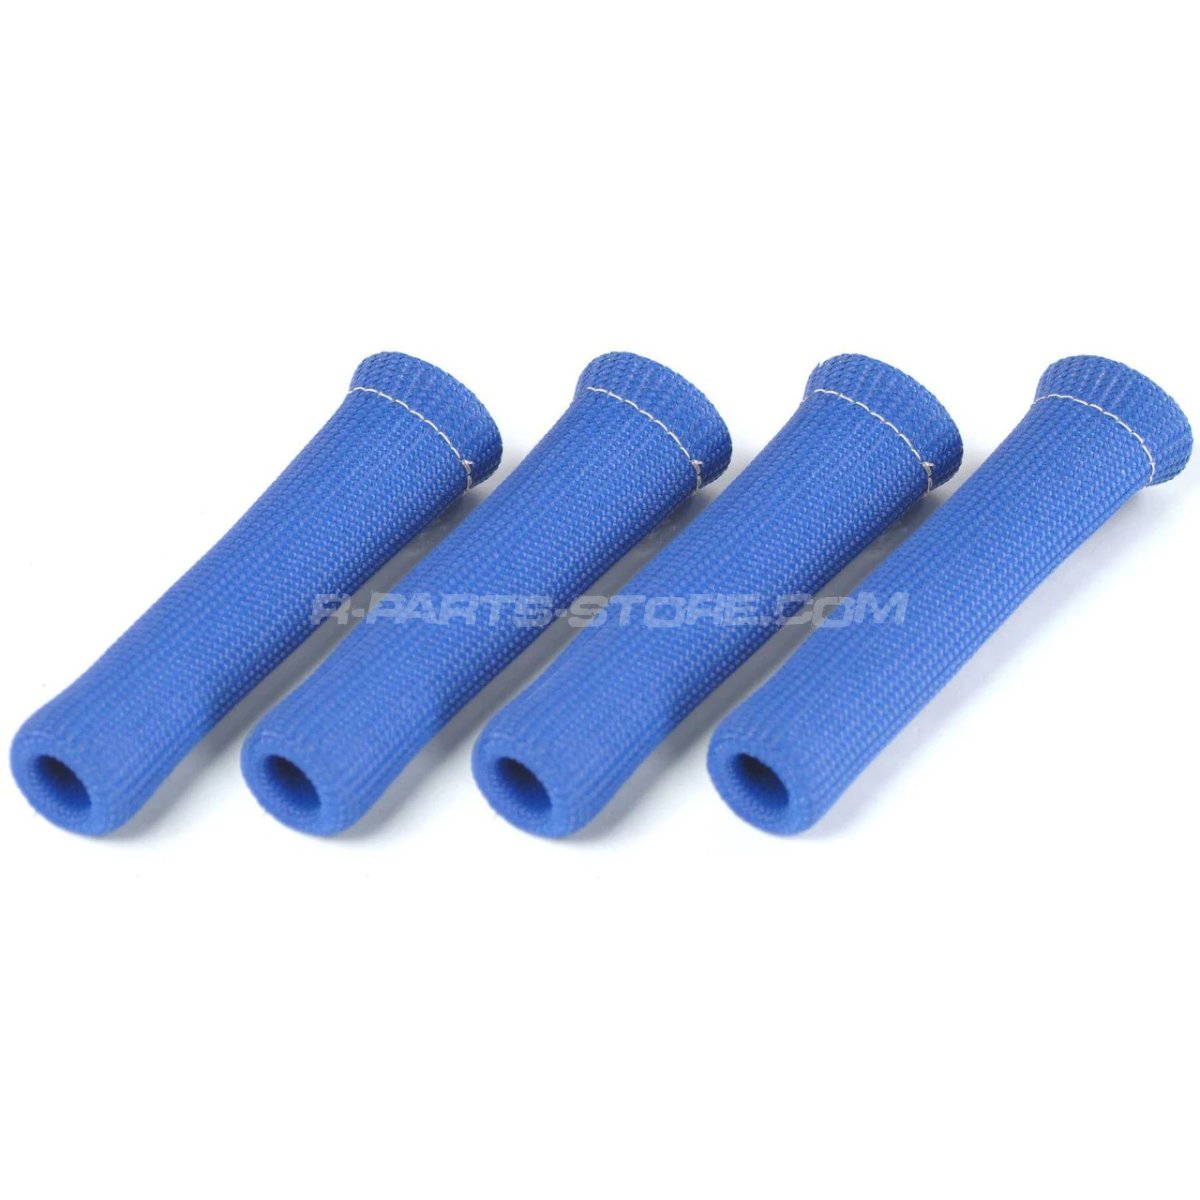 https://r-parts-store.com/media/image/product/113691/lg/dei-protect-a-boot-sleeve_dei-spark-plug-boot-protectors-protect-a-boot-sleeve-125-id.jpg